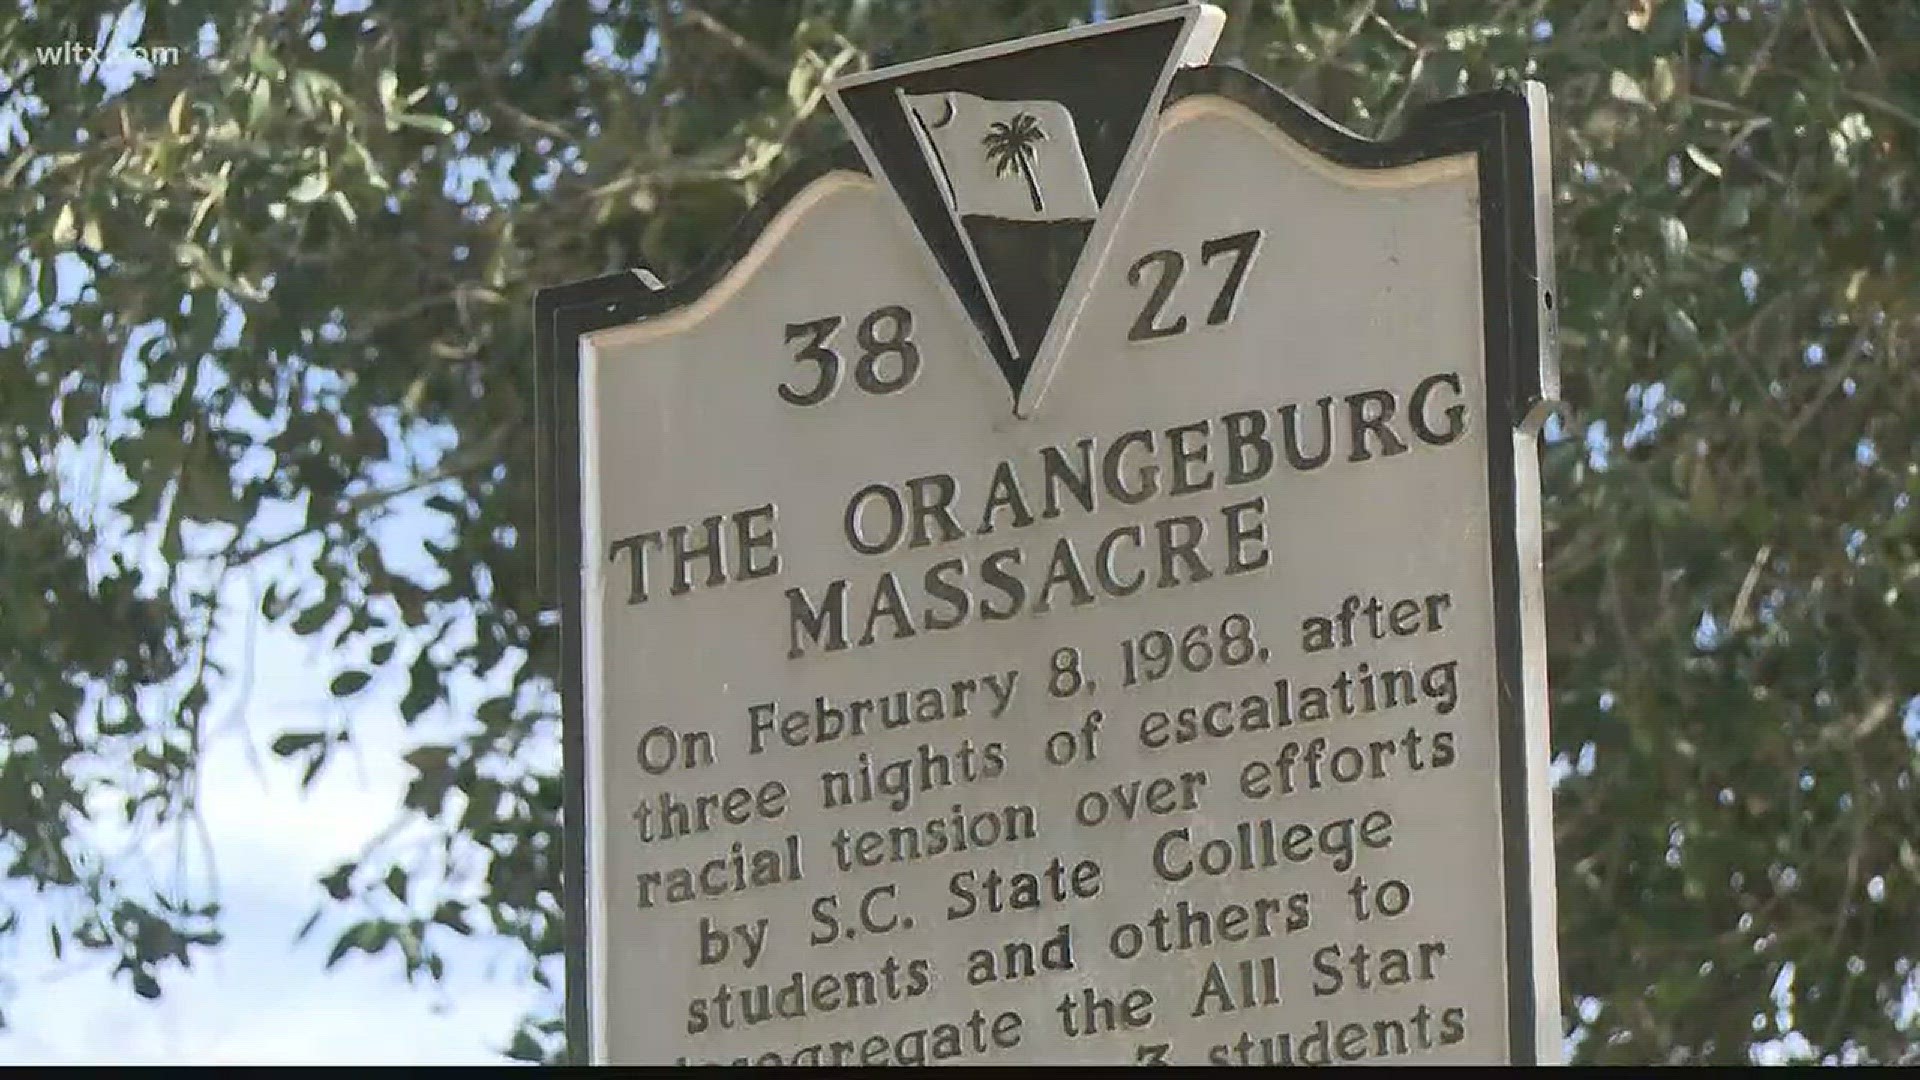 Fifty years after the Orangeburg massacre in 1968, witnesses returned to South Carolina State University to reflect on what happened that day.